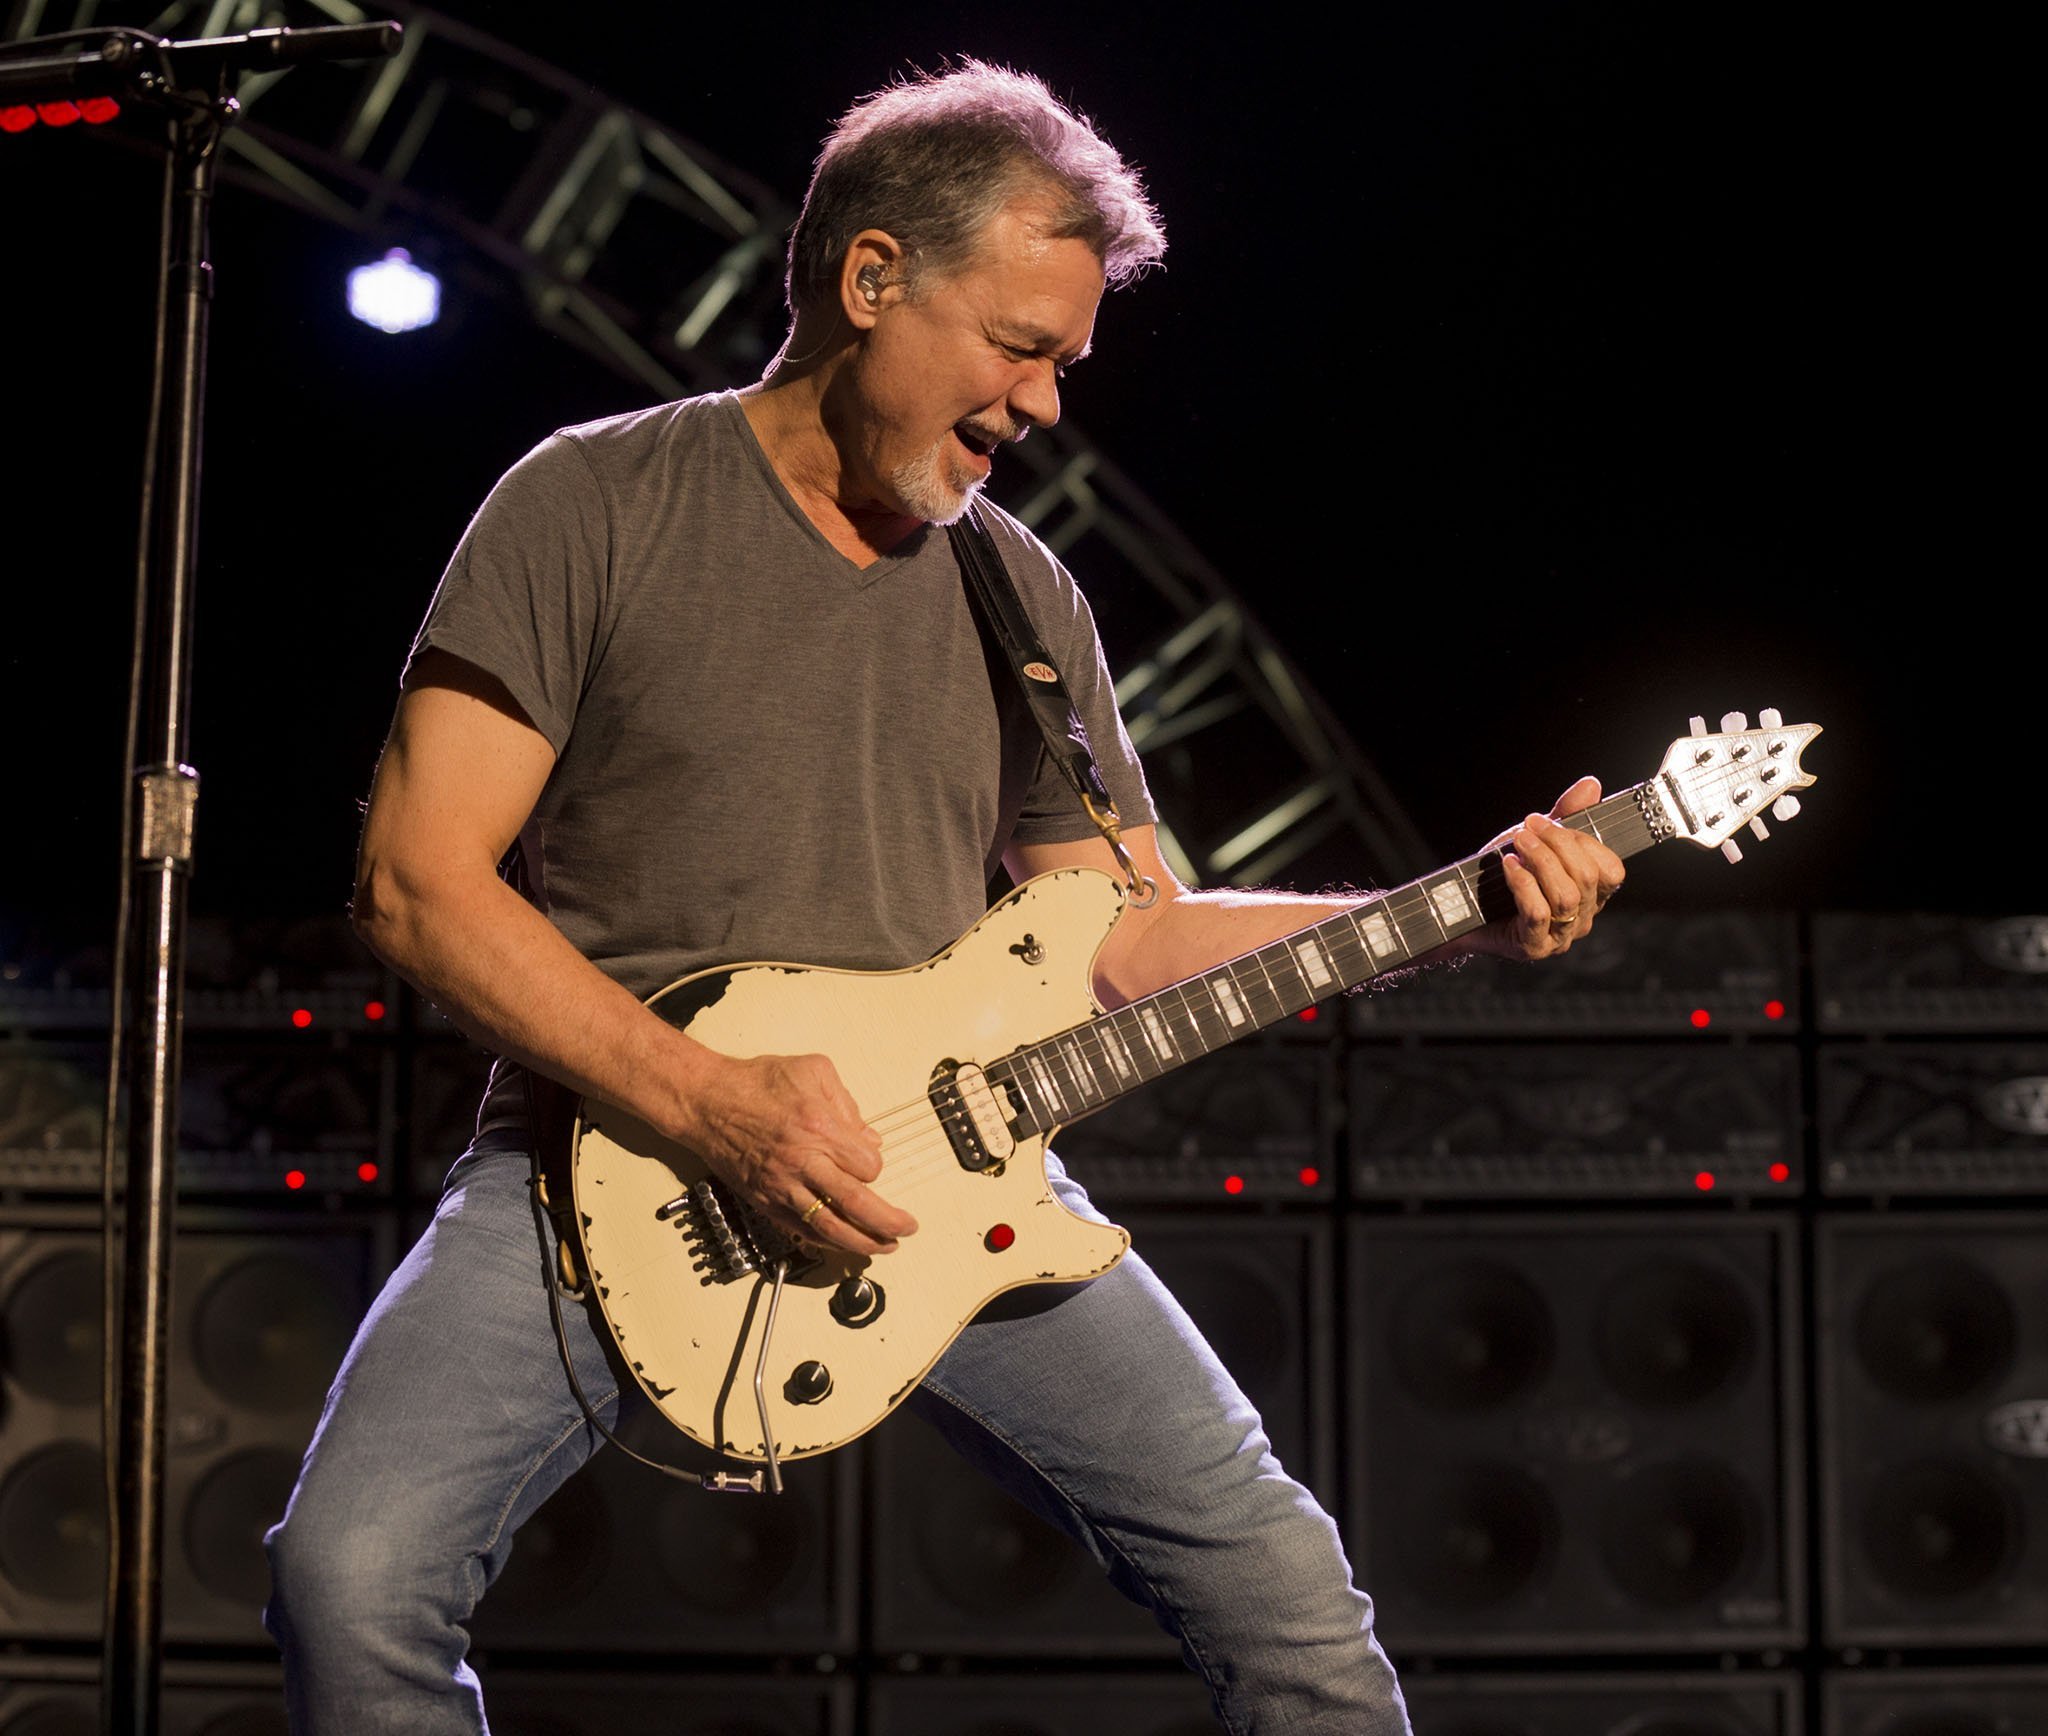 The late Eddie Van Halen, pictured in 2015, was diagnosed with tongue cancer in 2000